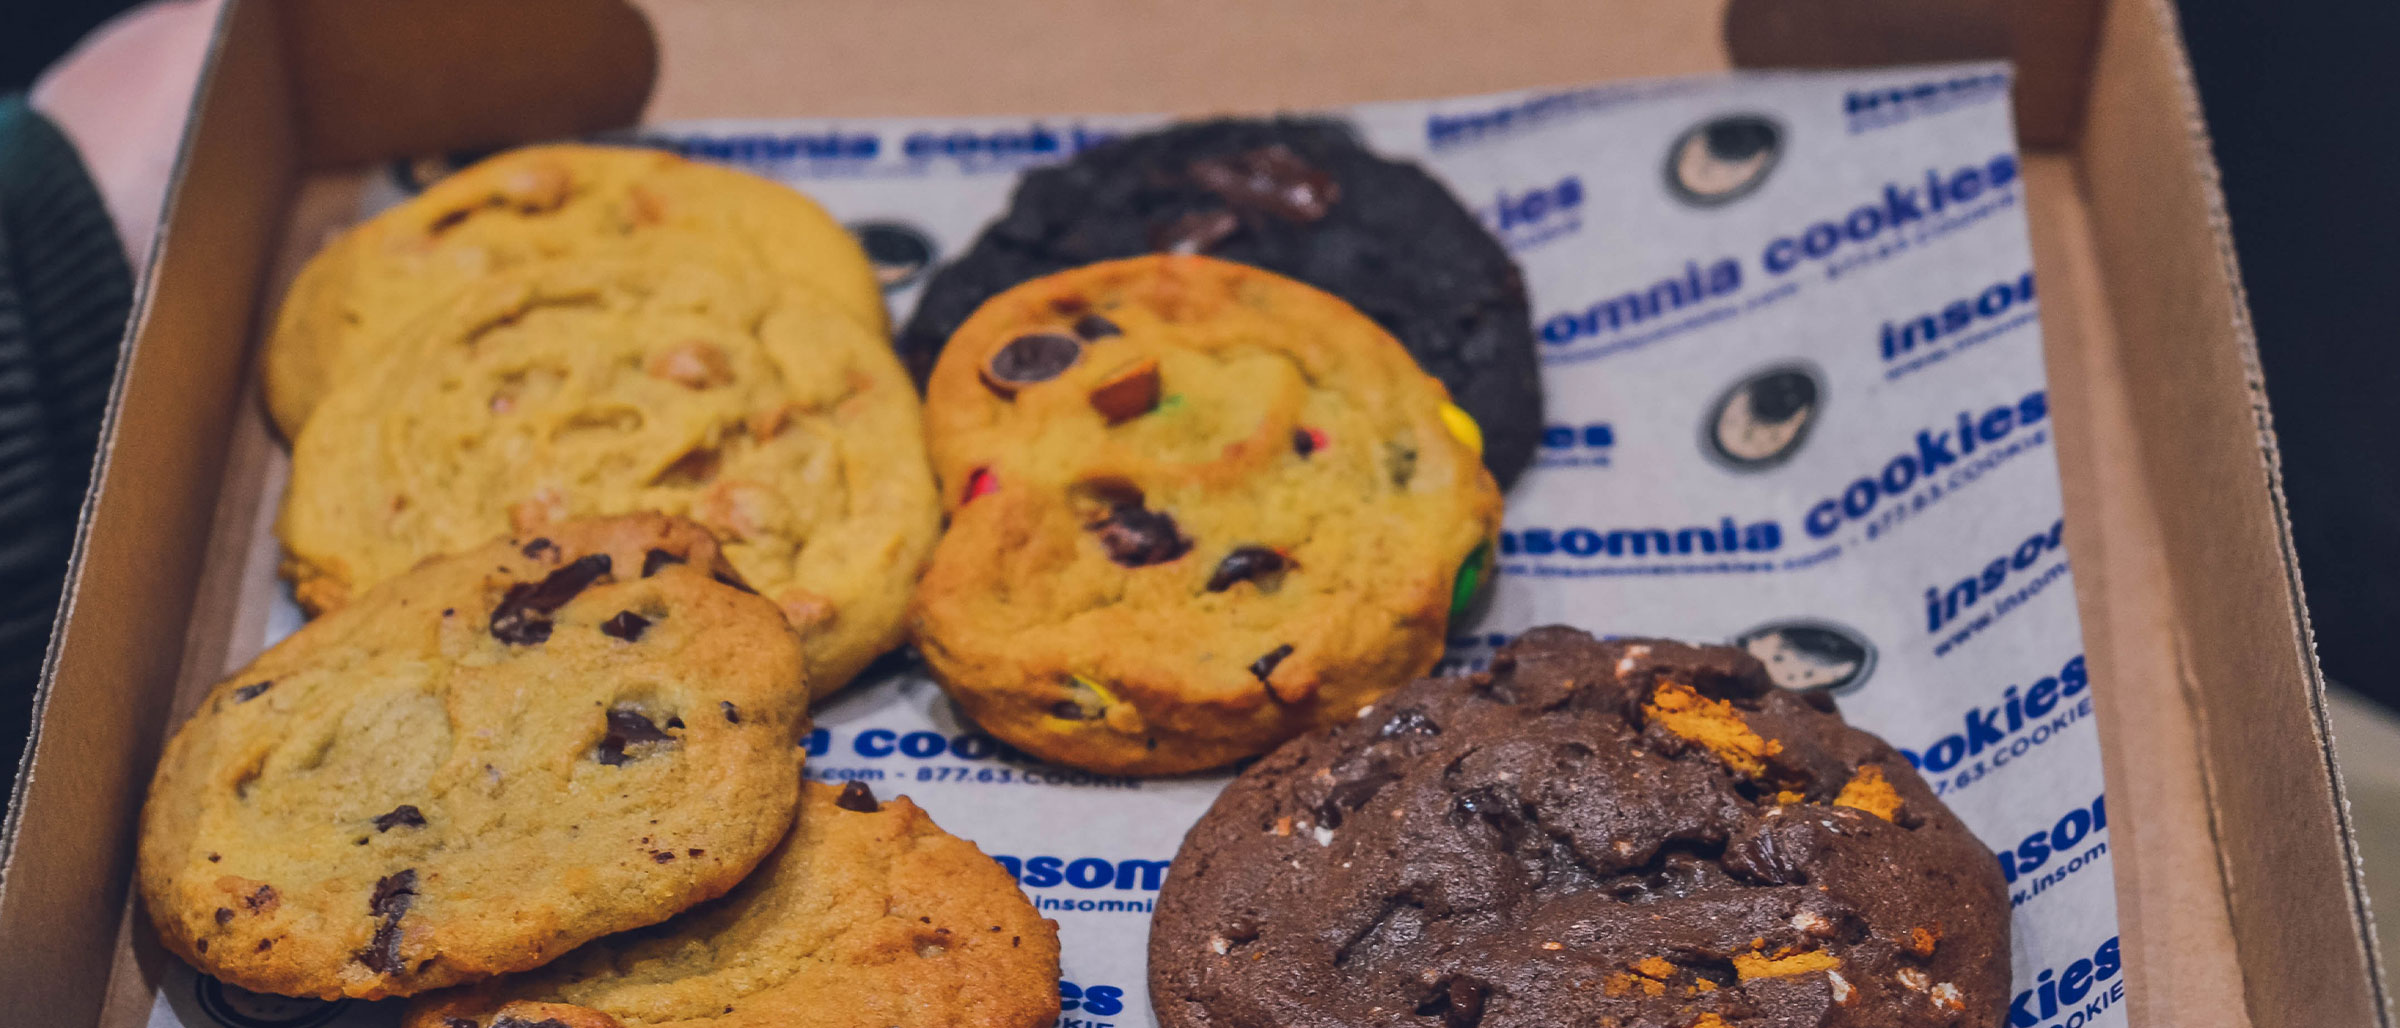 Insomnia Cookies in box